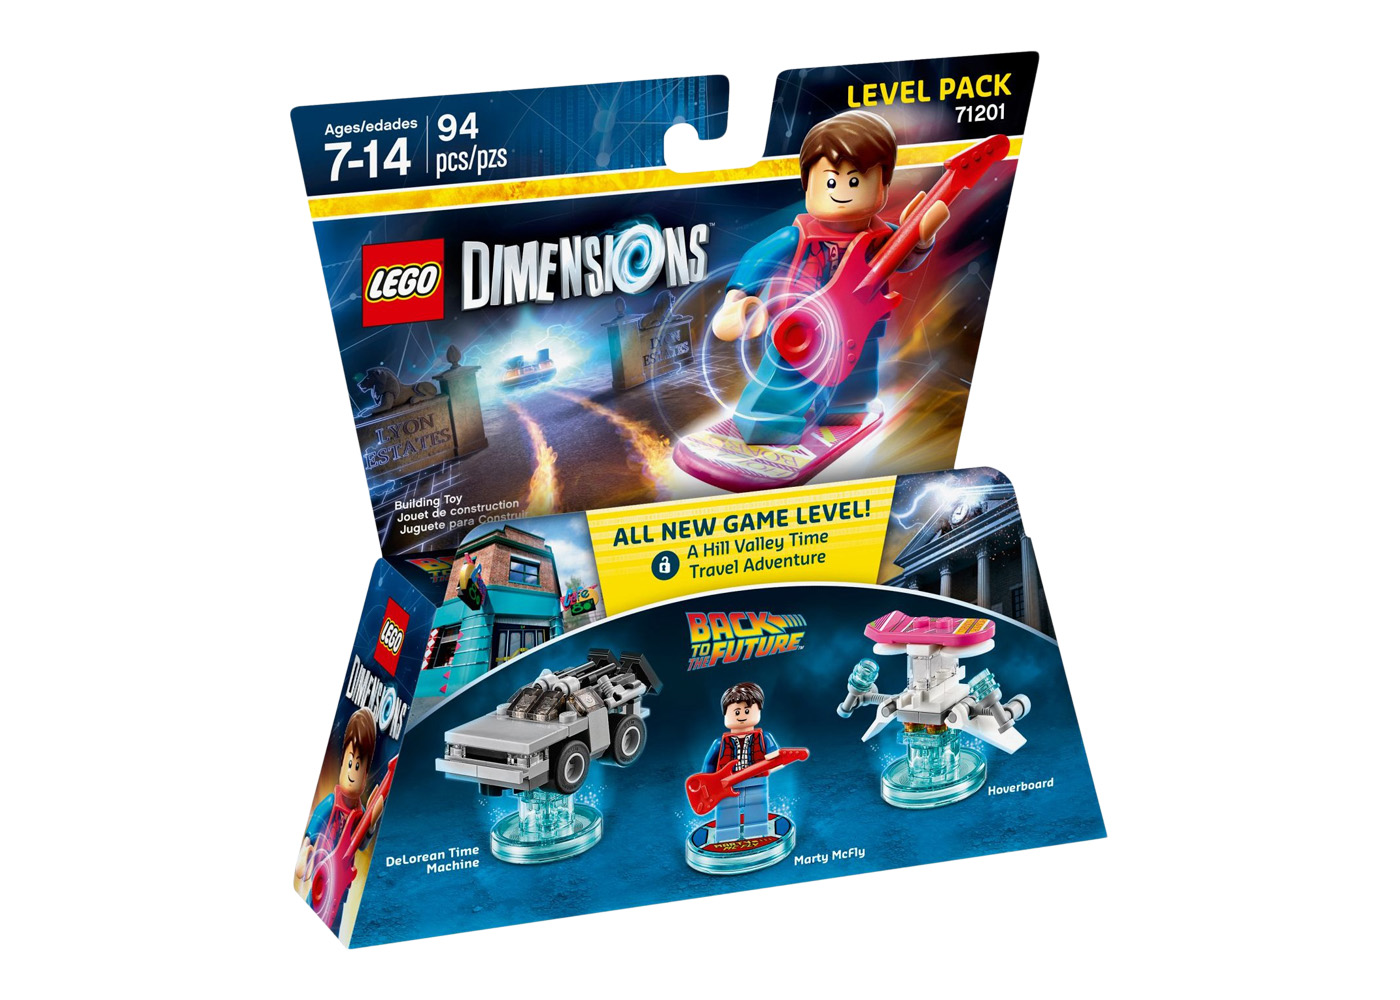 LEGO Dimensions Back to the Future Level Pack Set 71201 - FW16 - US